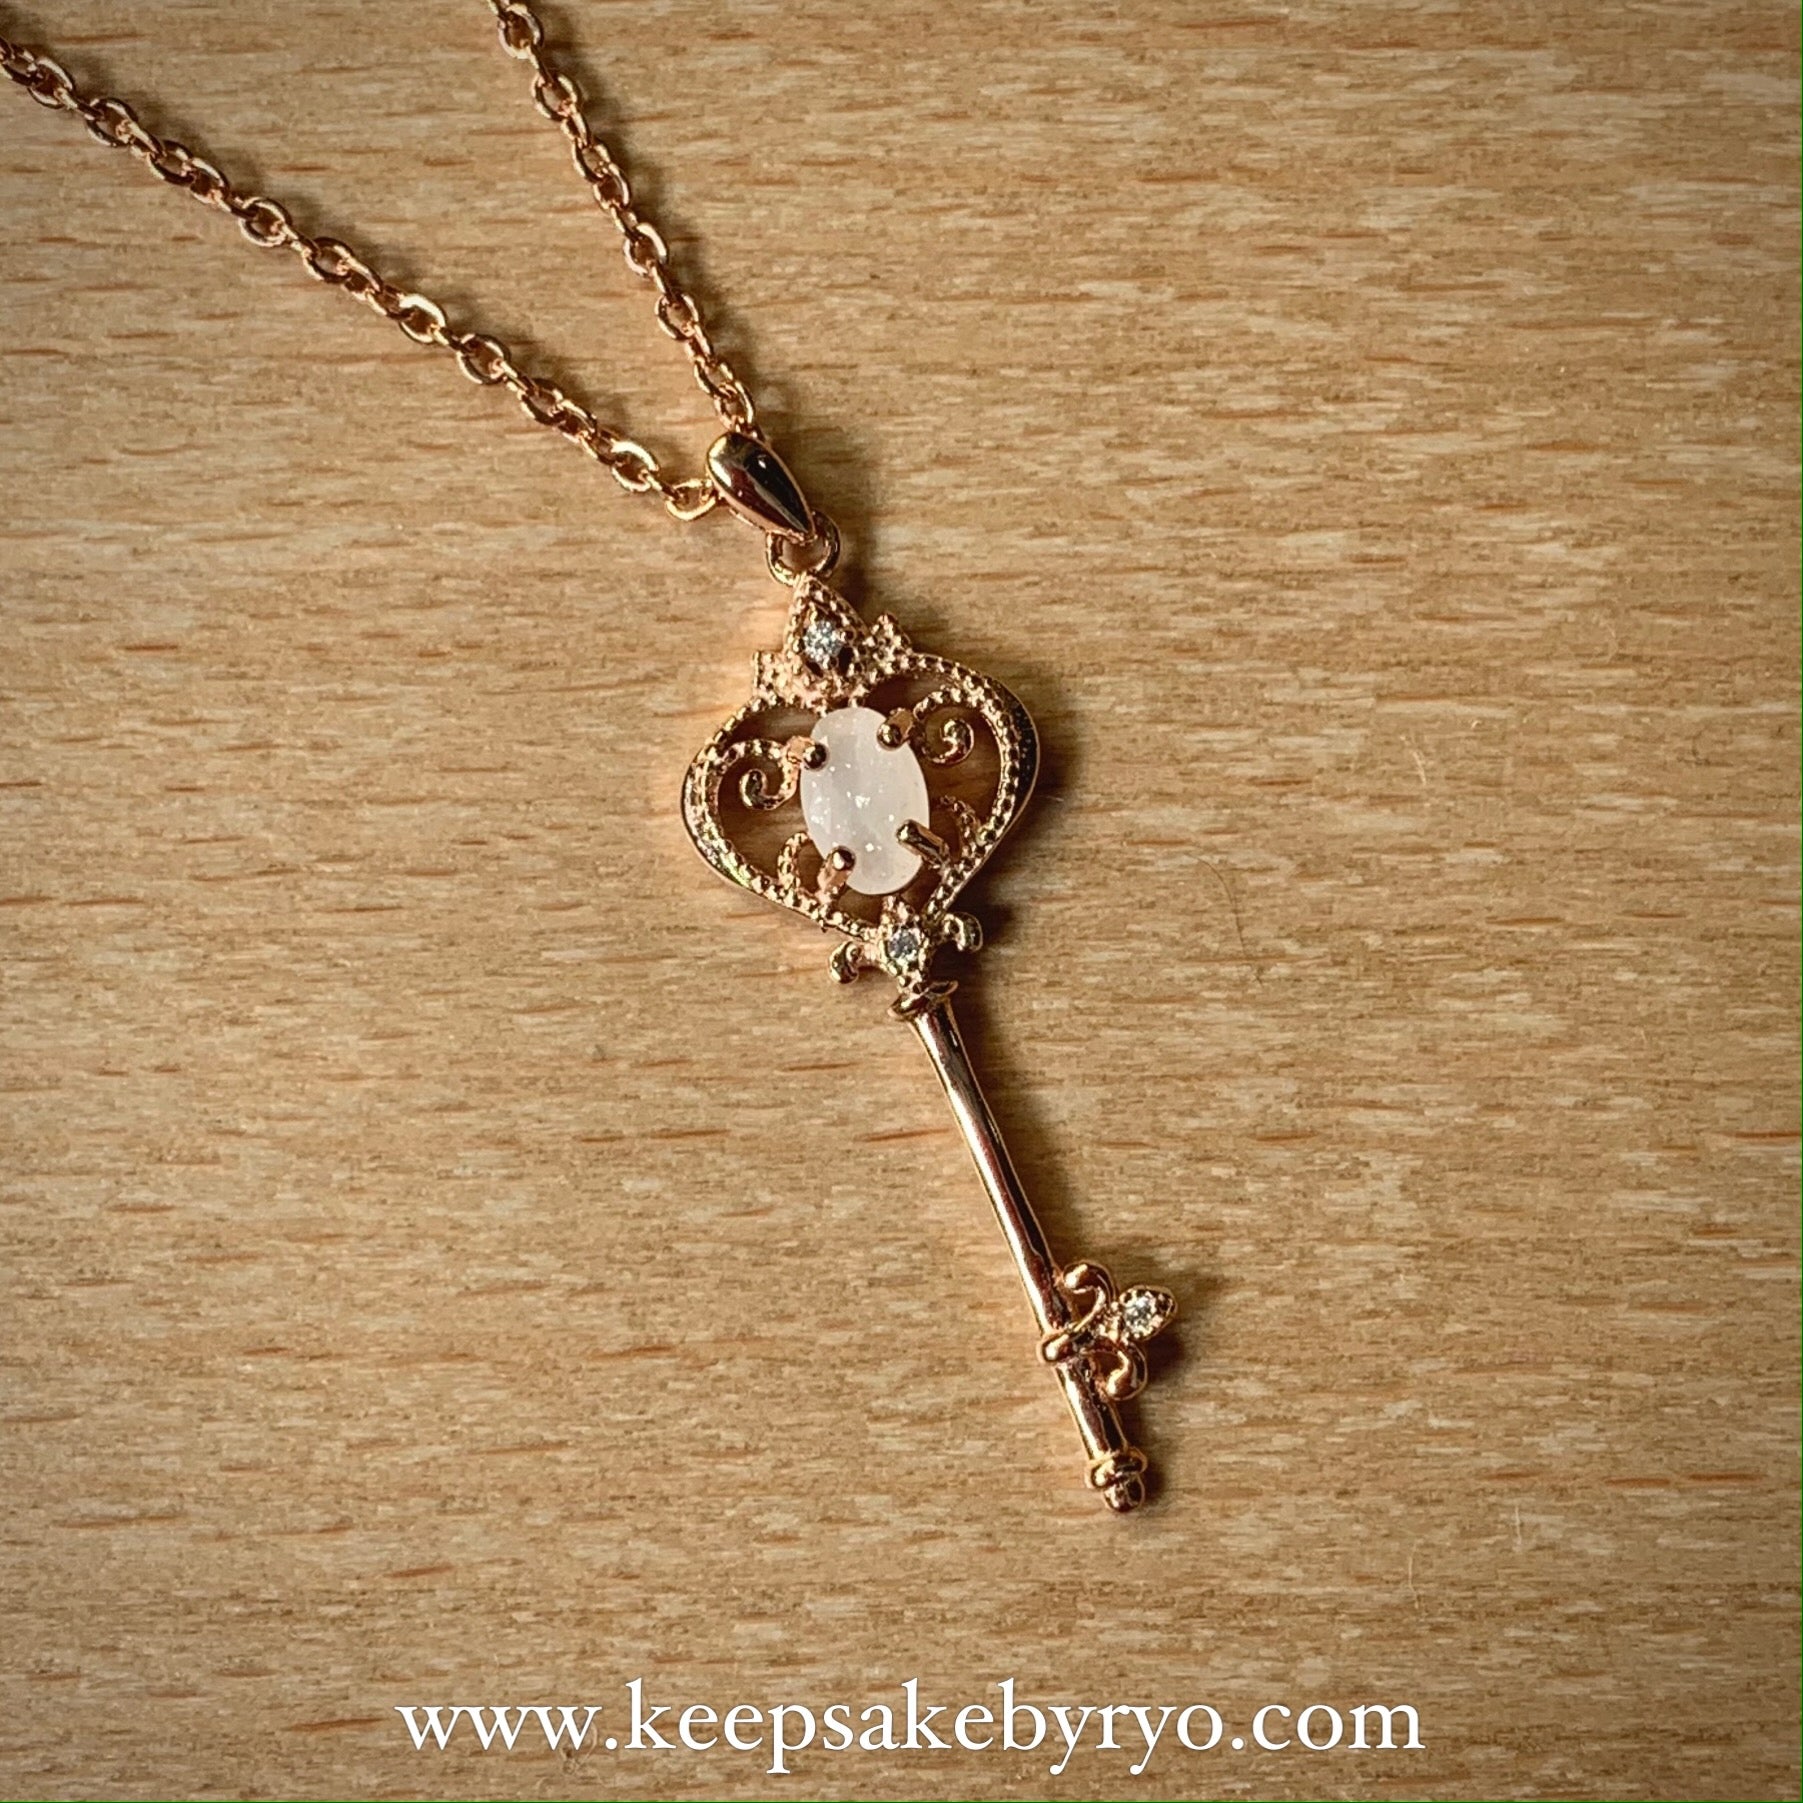 SOLITAIRE: IRYSSA KEY PENDANT NECKLACE WITH OVAL INCLUSION STONE